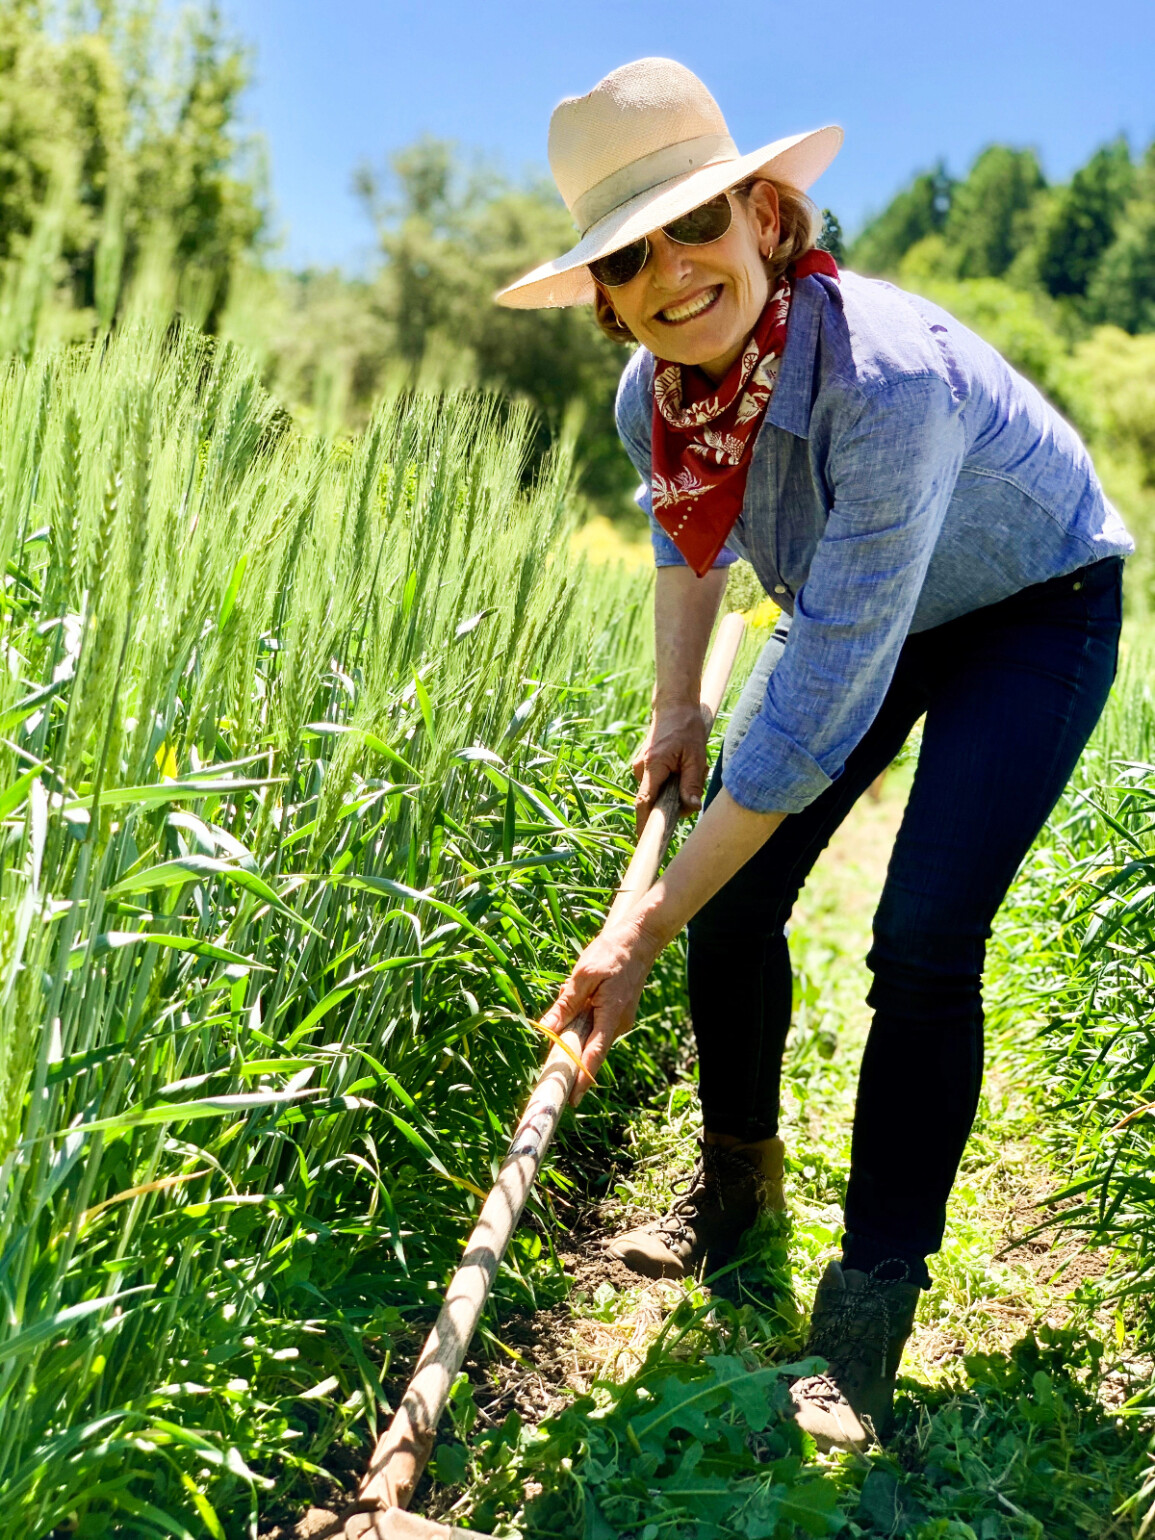 Ancient Grains, Hourani grown at Honore Farm and Mill, Pictured: Elizabeth DeRuff